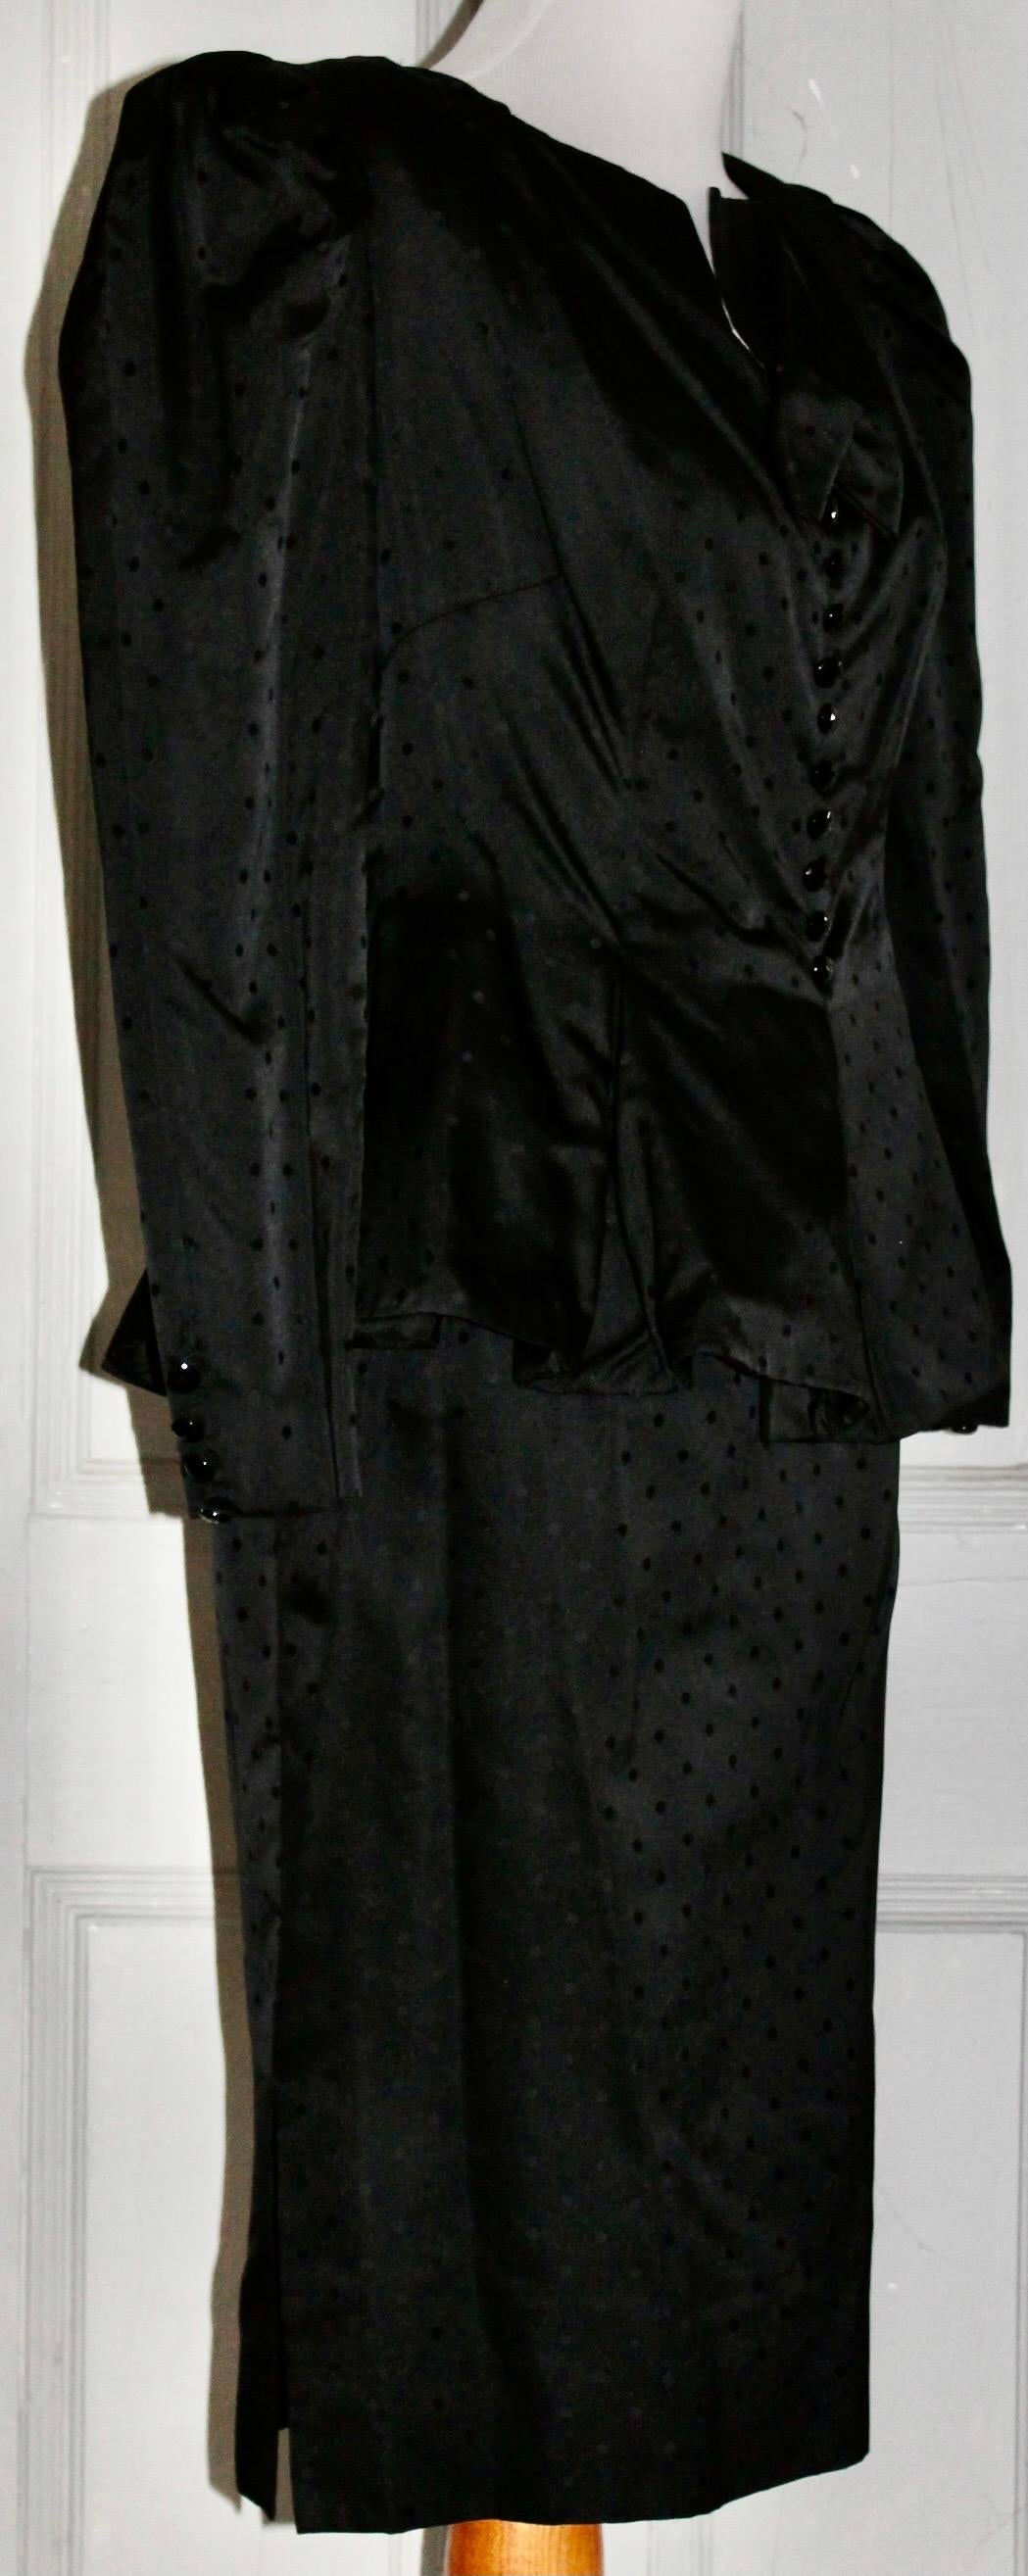 Offering a Nina Ricci 'Boutique' Paris, Black silk suit retailed by Bergdorf Goodman.
Puffy shoulders, skirted waist jacket, black on black polka dots, silk lining, approx. size Eu 38-40. Length of skirt 25.50